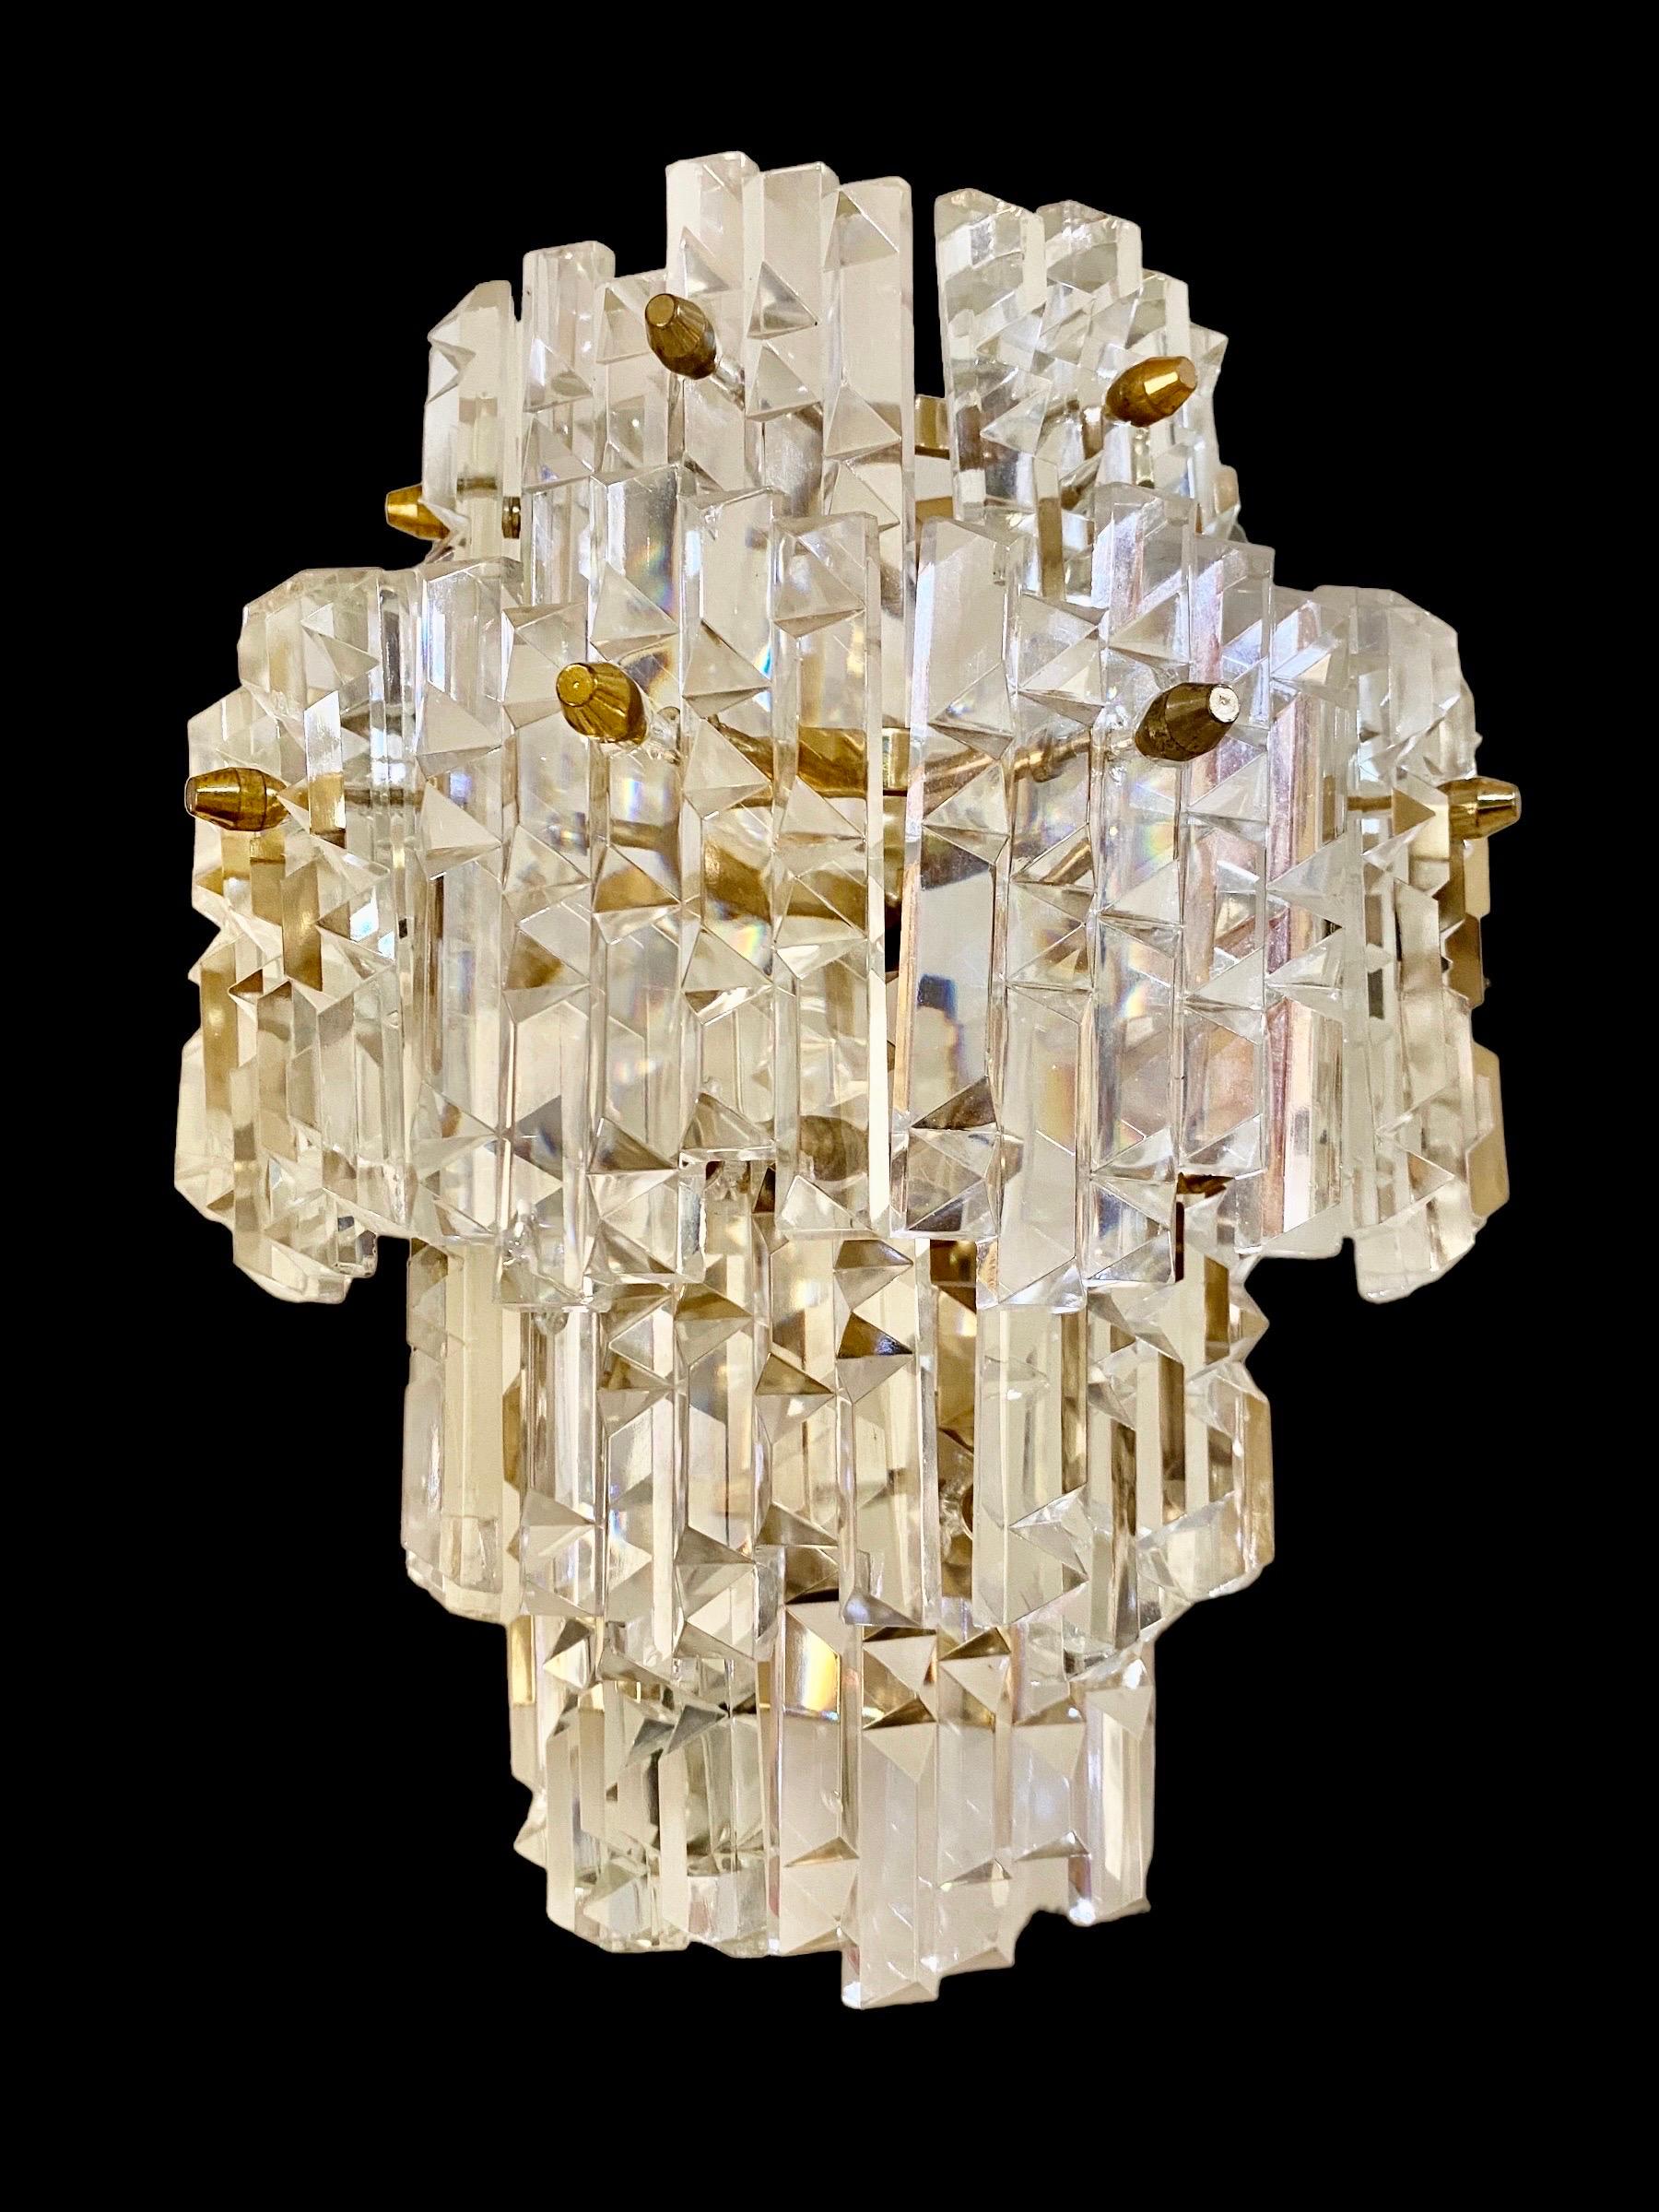 Austria wall lighting cut glass. The design and the quality of the glass make this piece the best of the Austrian design.

This artistic glass piece features the exclusive design of an austrian designer from the 1960s / 1970s. This wall lighting